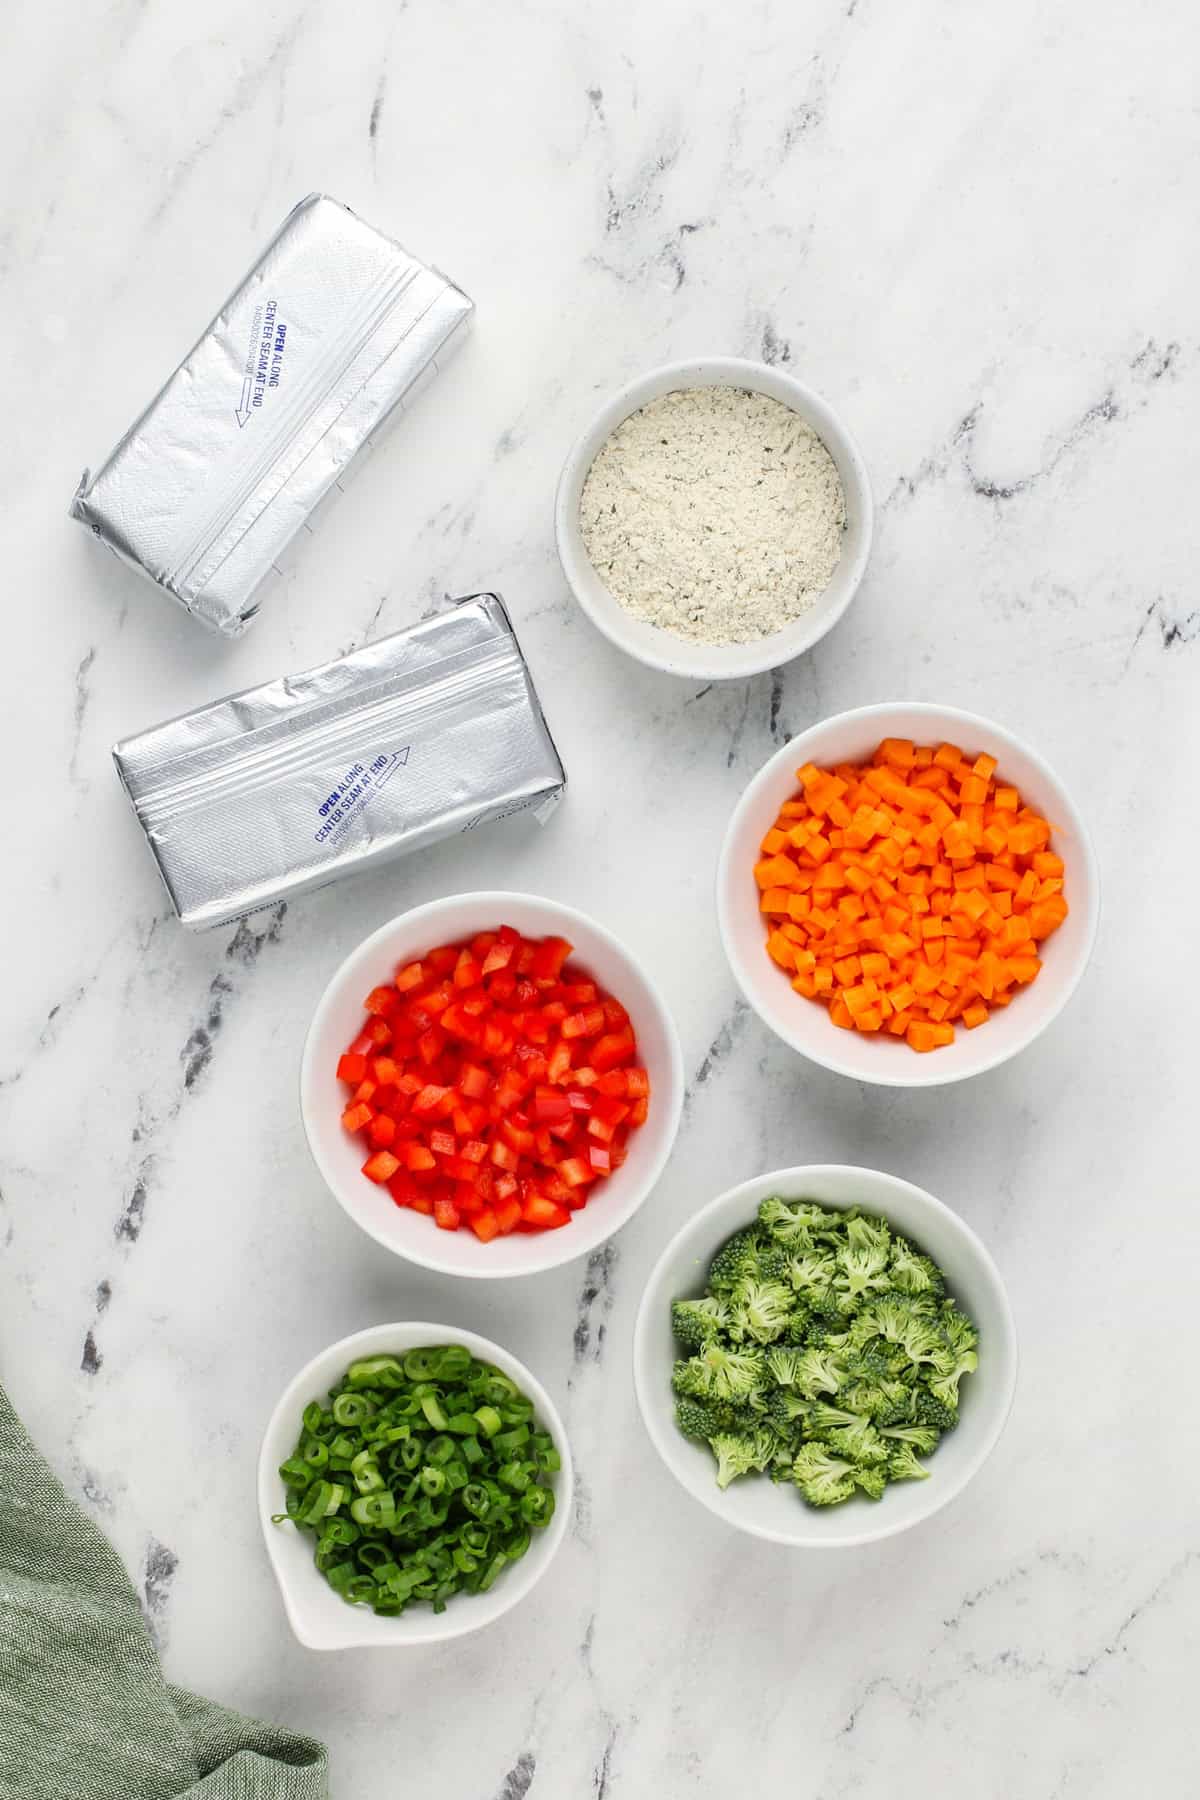 Ingredients for veggie cream cheese arranged on a marble countertop.